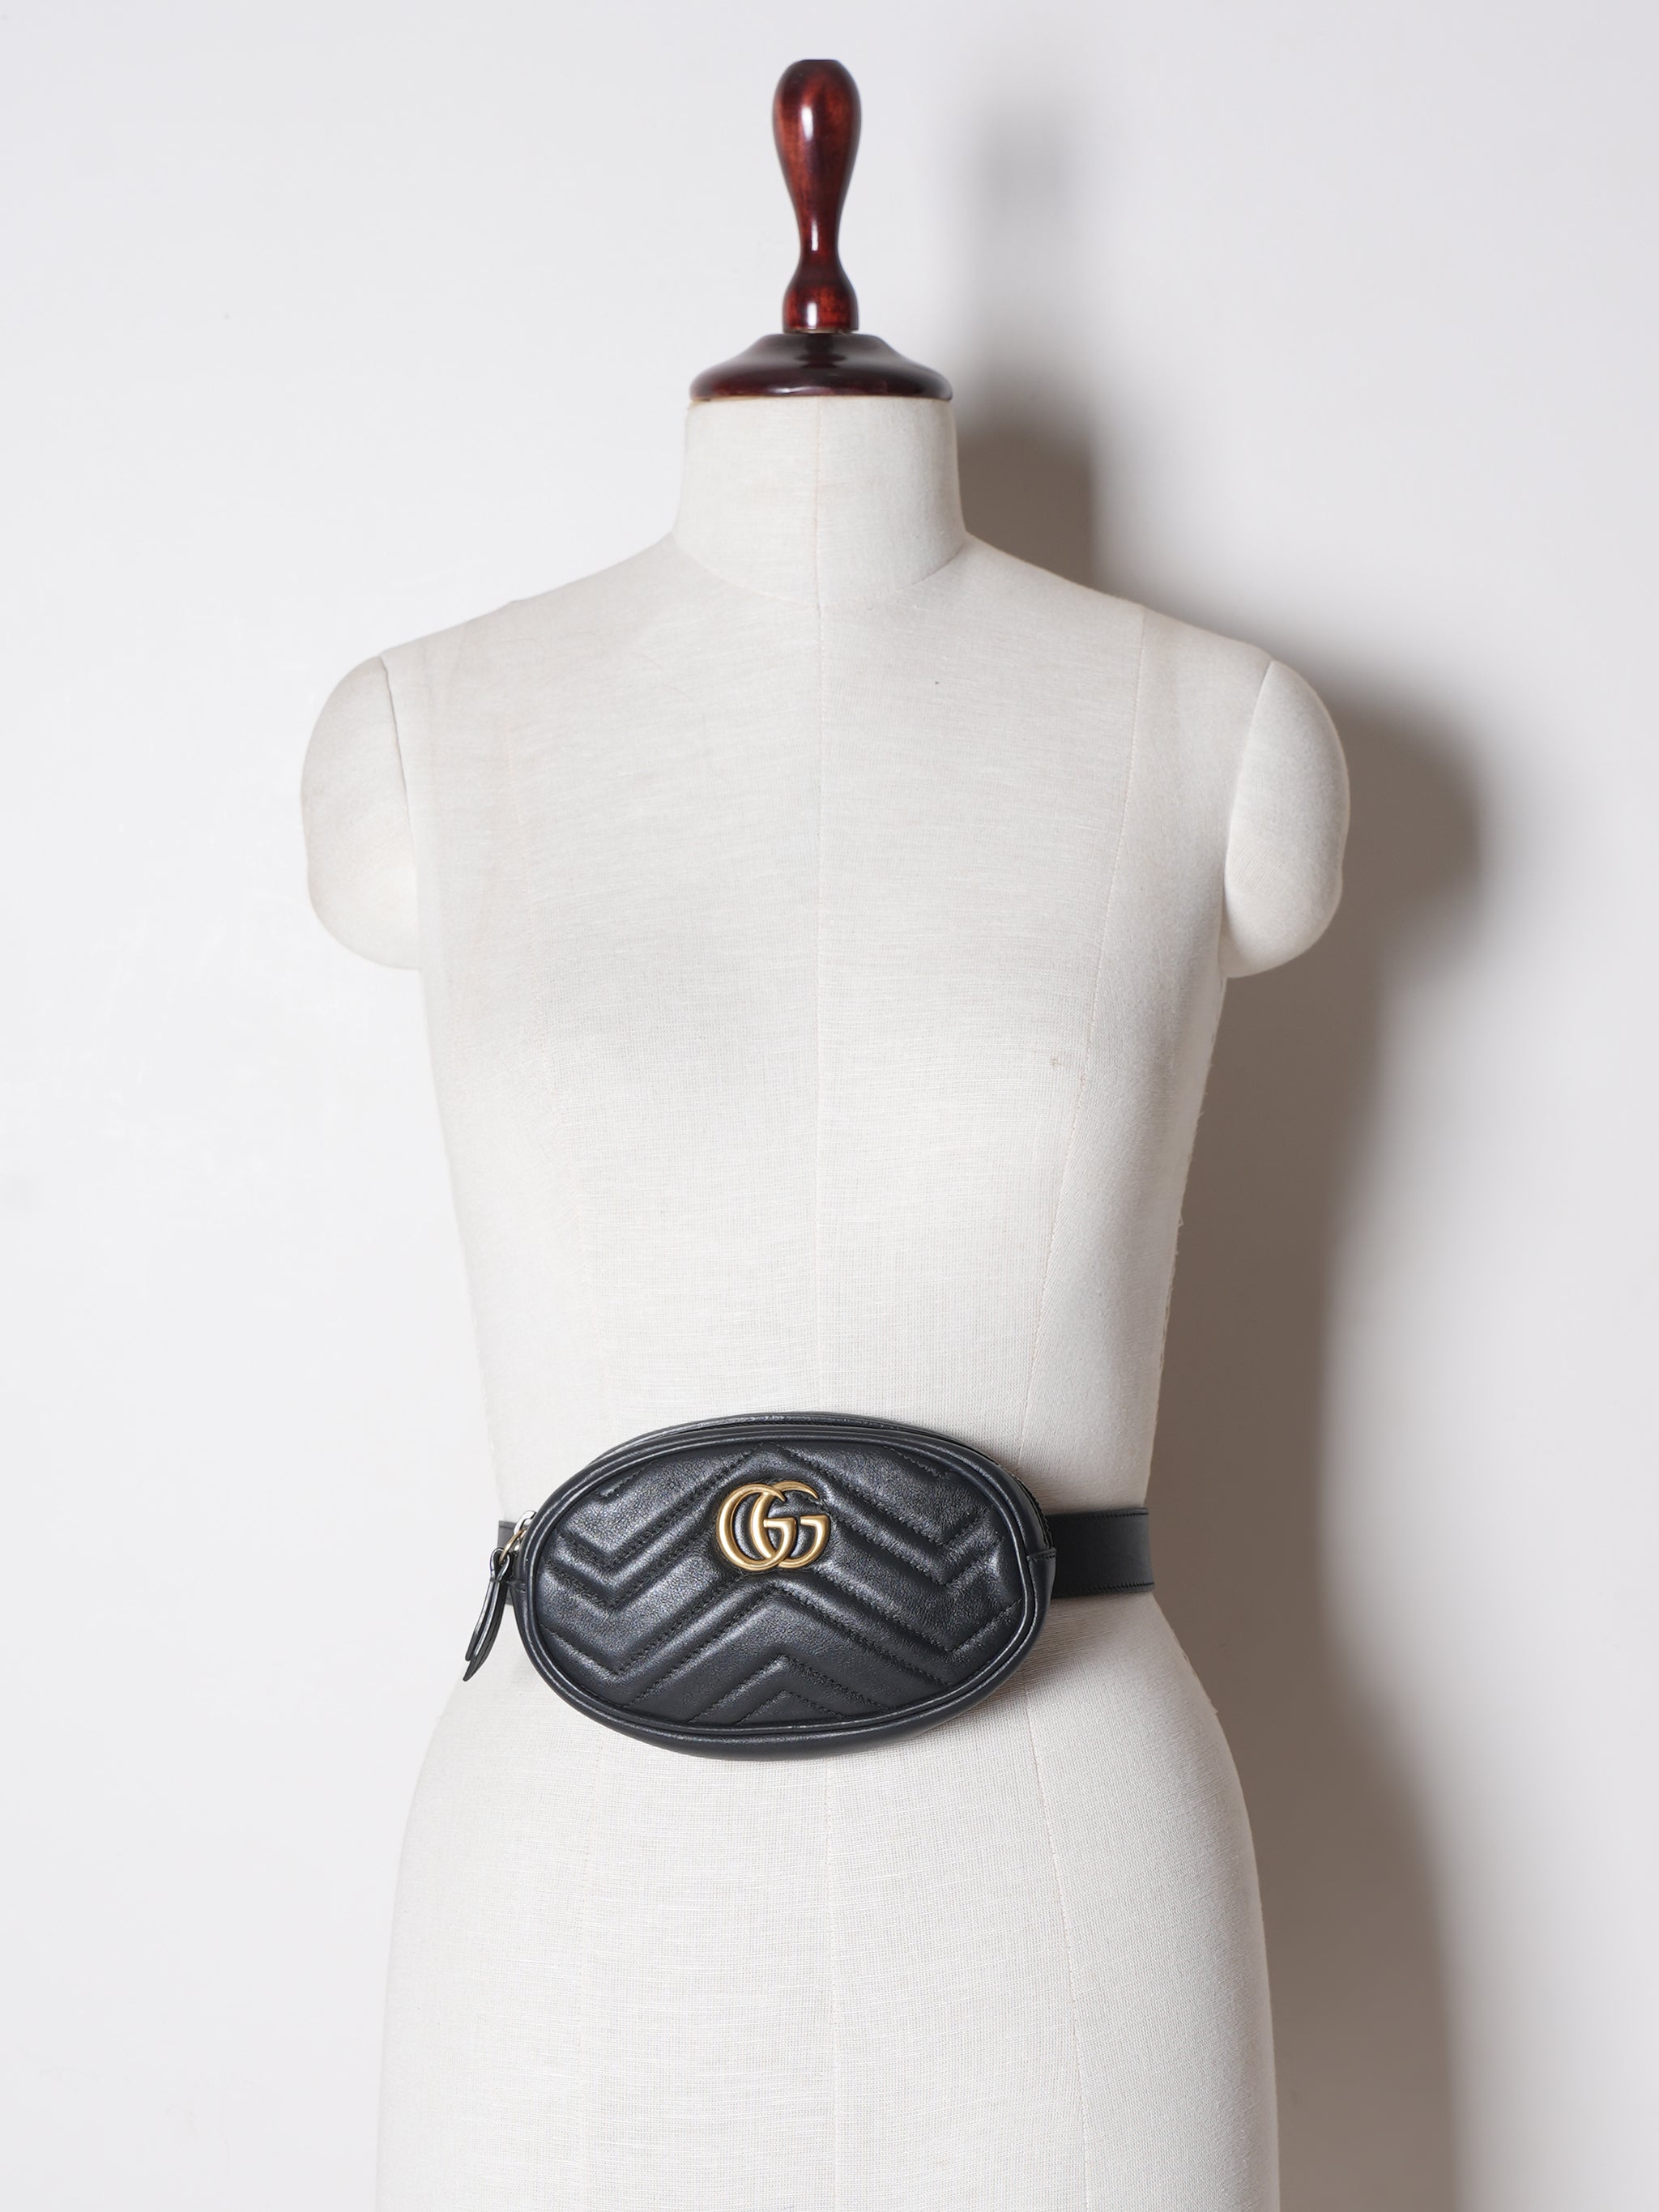 Gucci Marmont Quilted Belt Bag